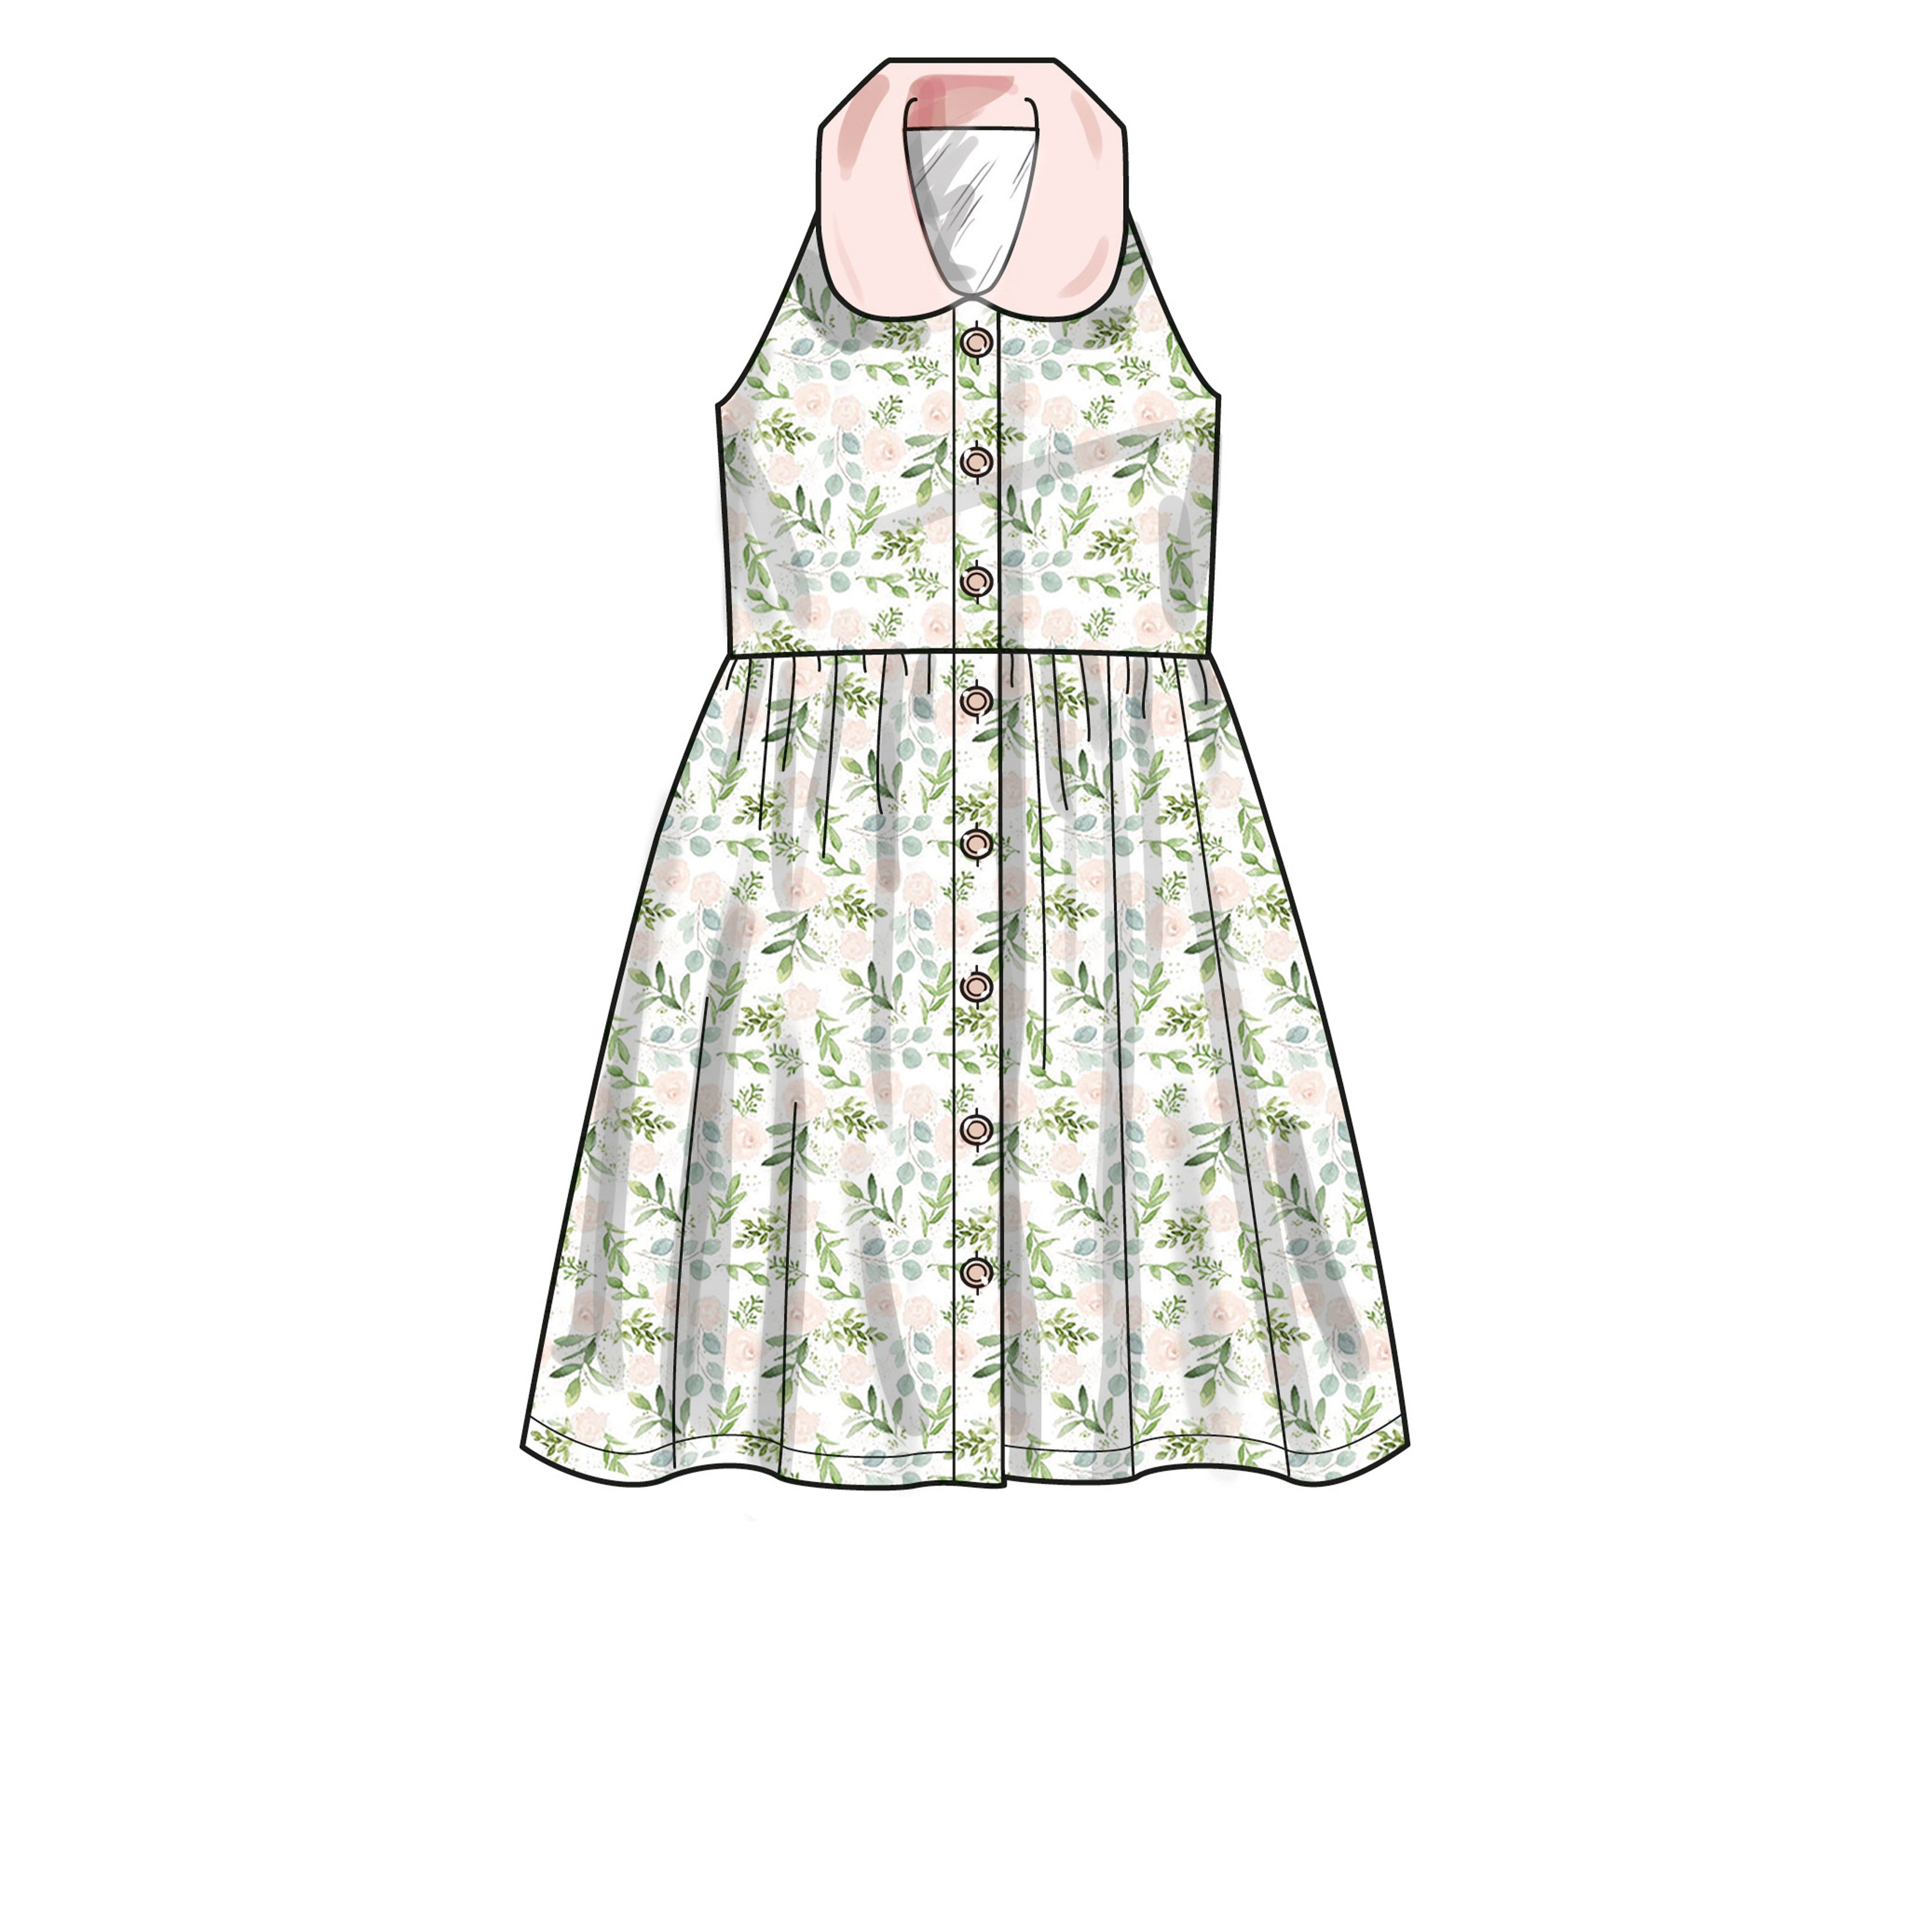 New Look sewing pattern 6727 Girls' Sundresses | Easy from Jaycotts Sewing Supplies